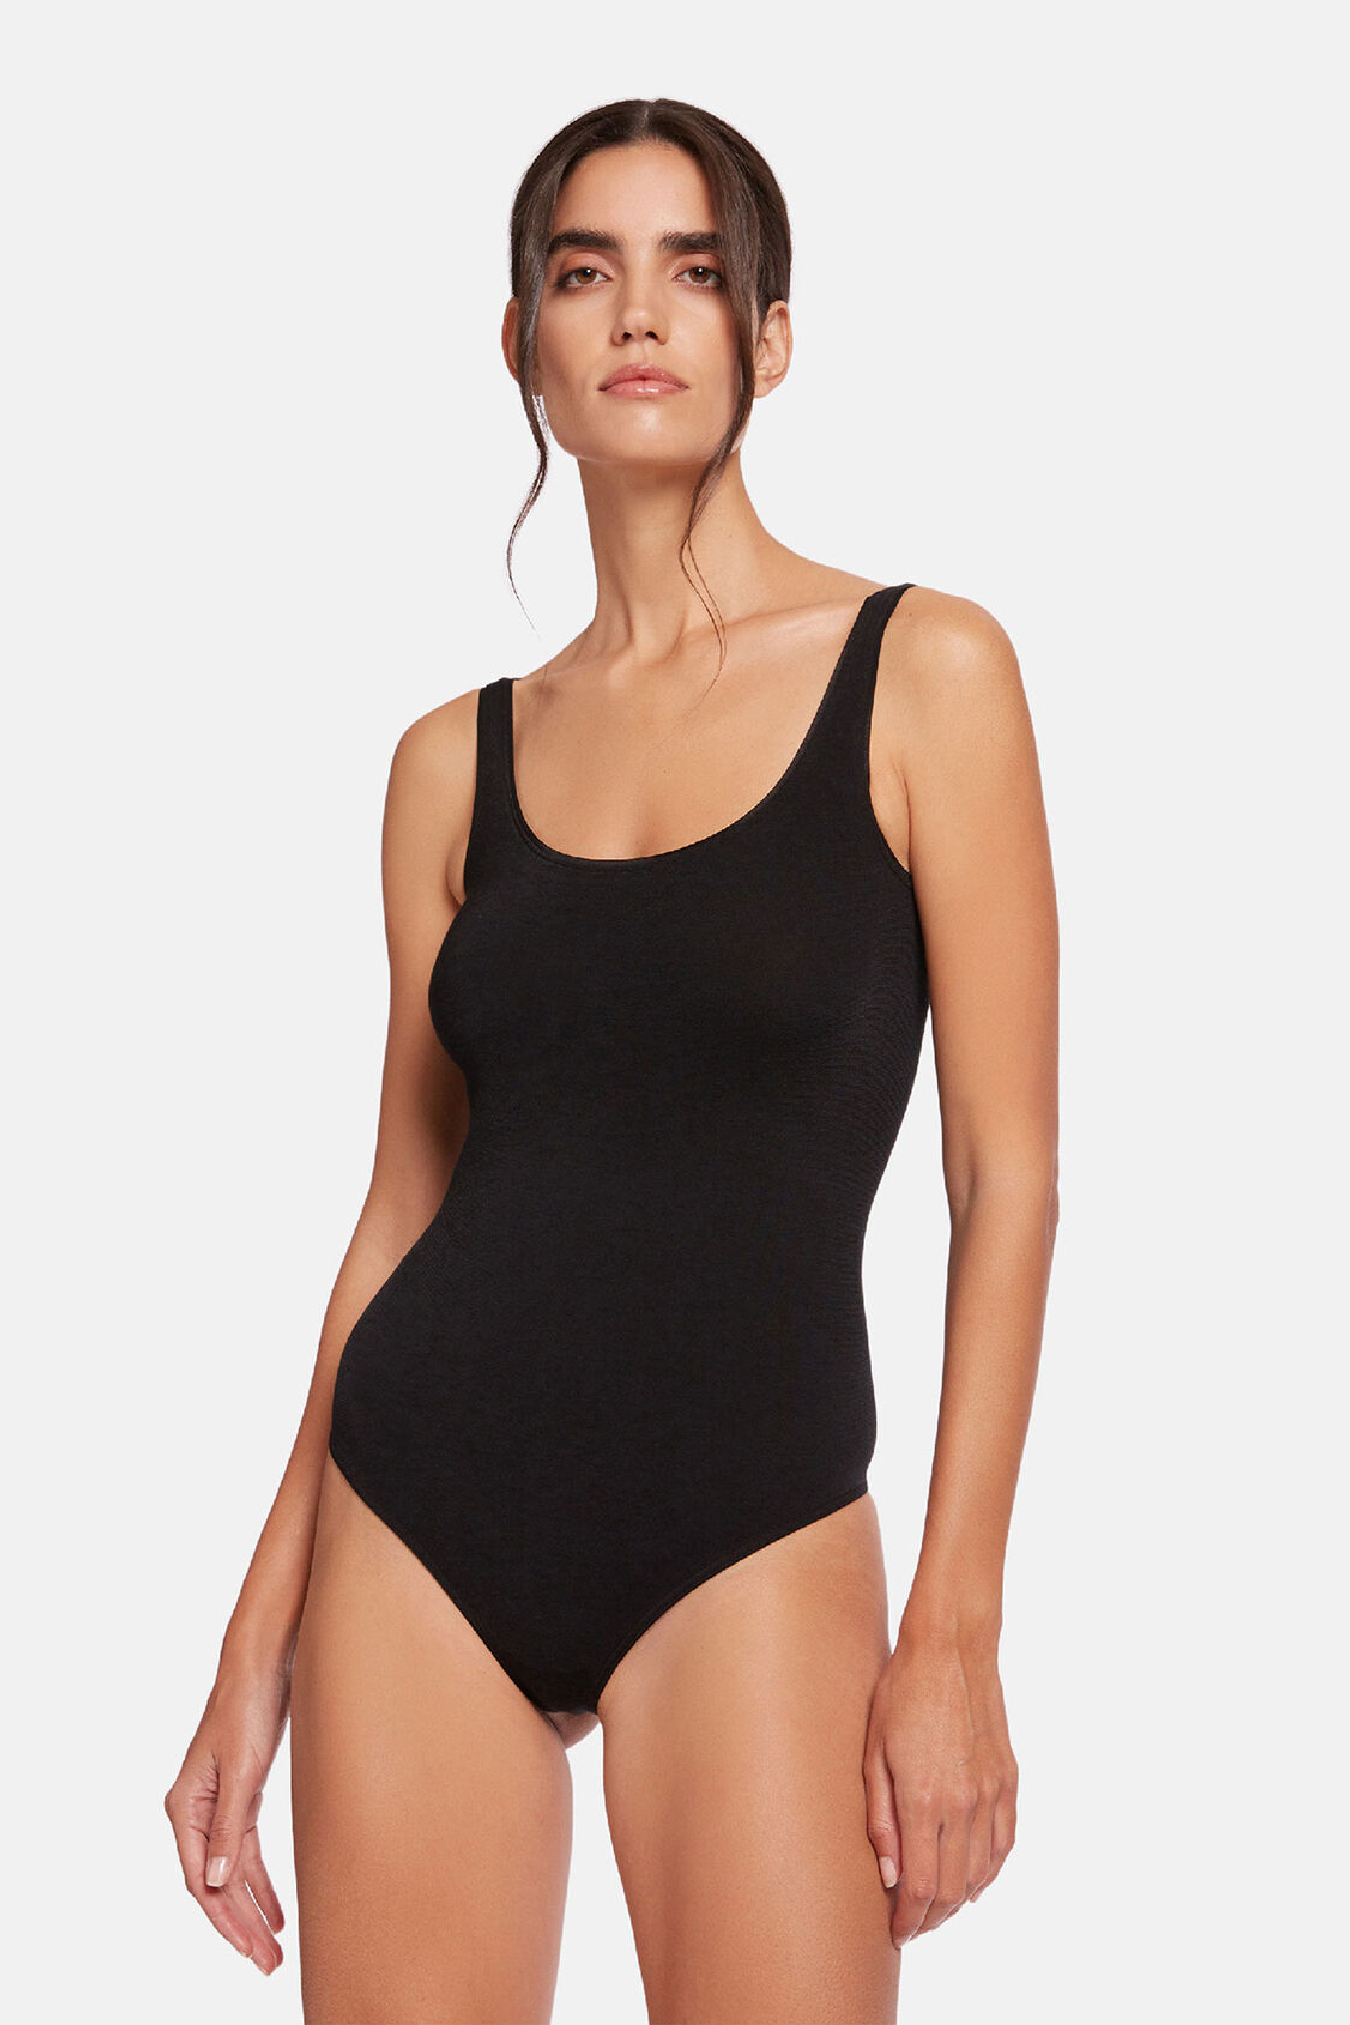 Wolford Buenos Aires bodysuit